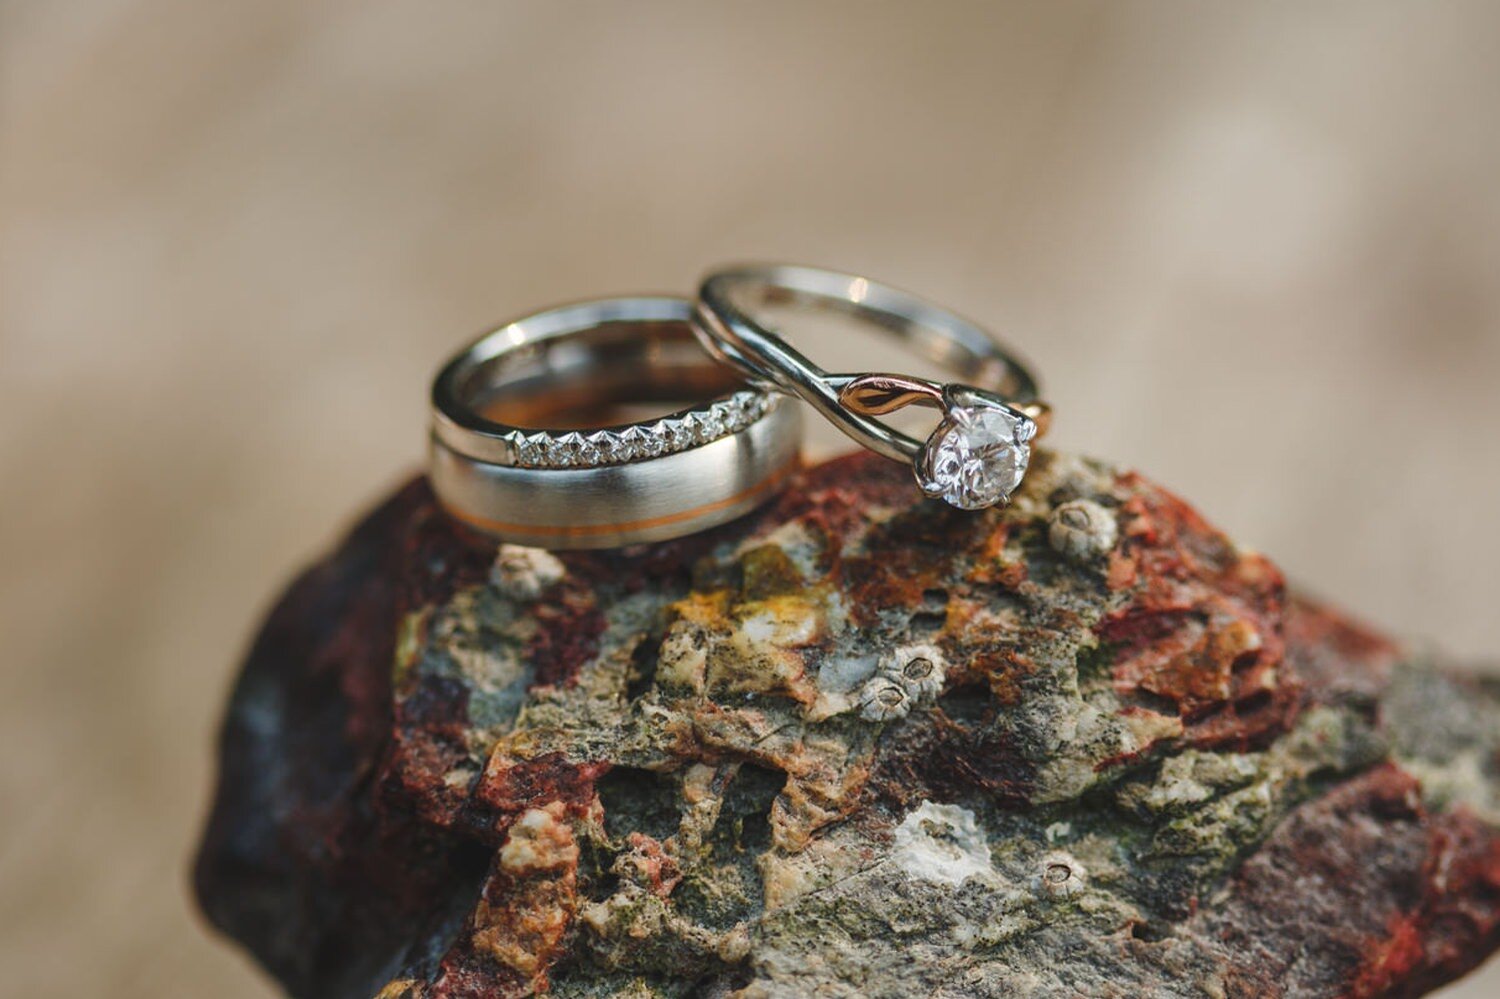  wedding rings perched on a rock 